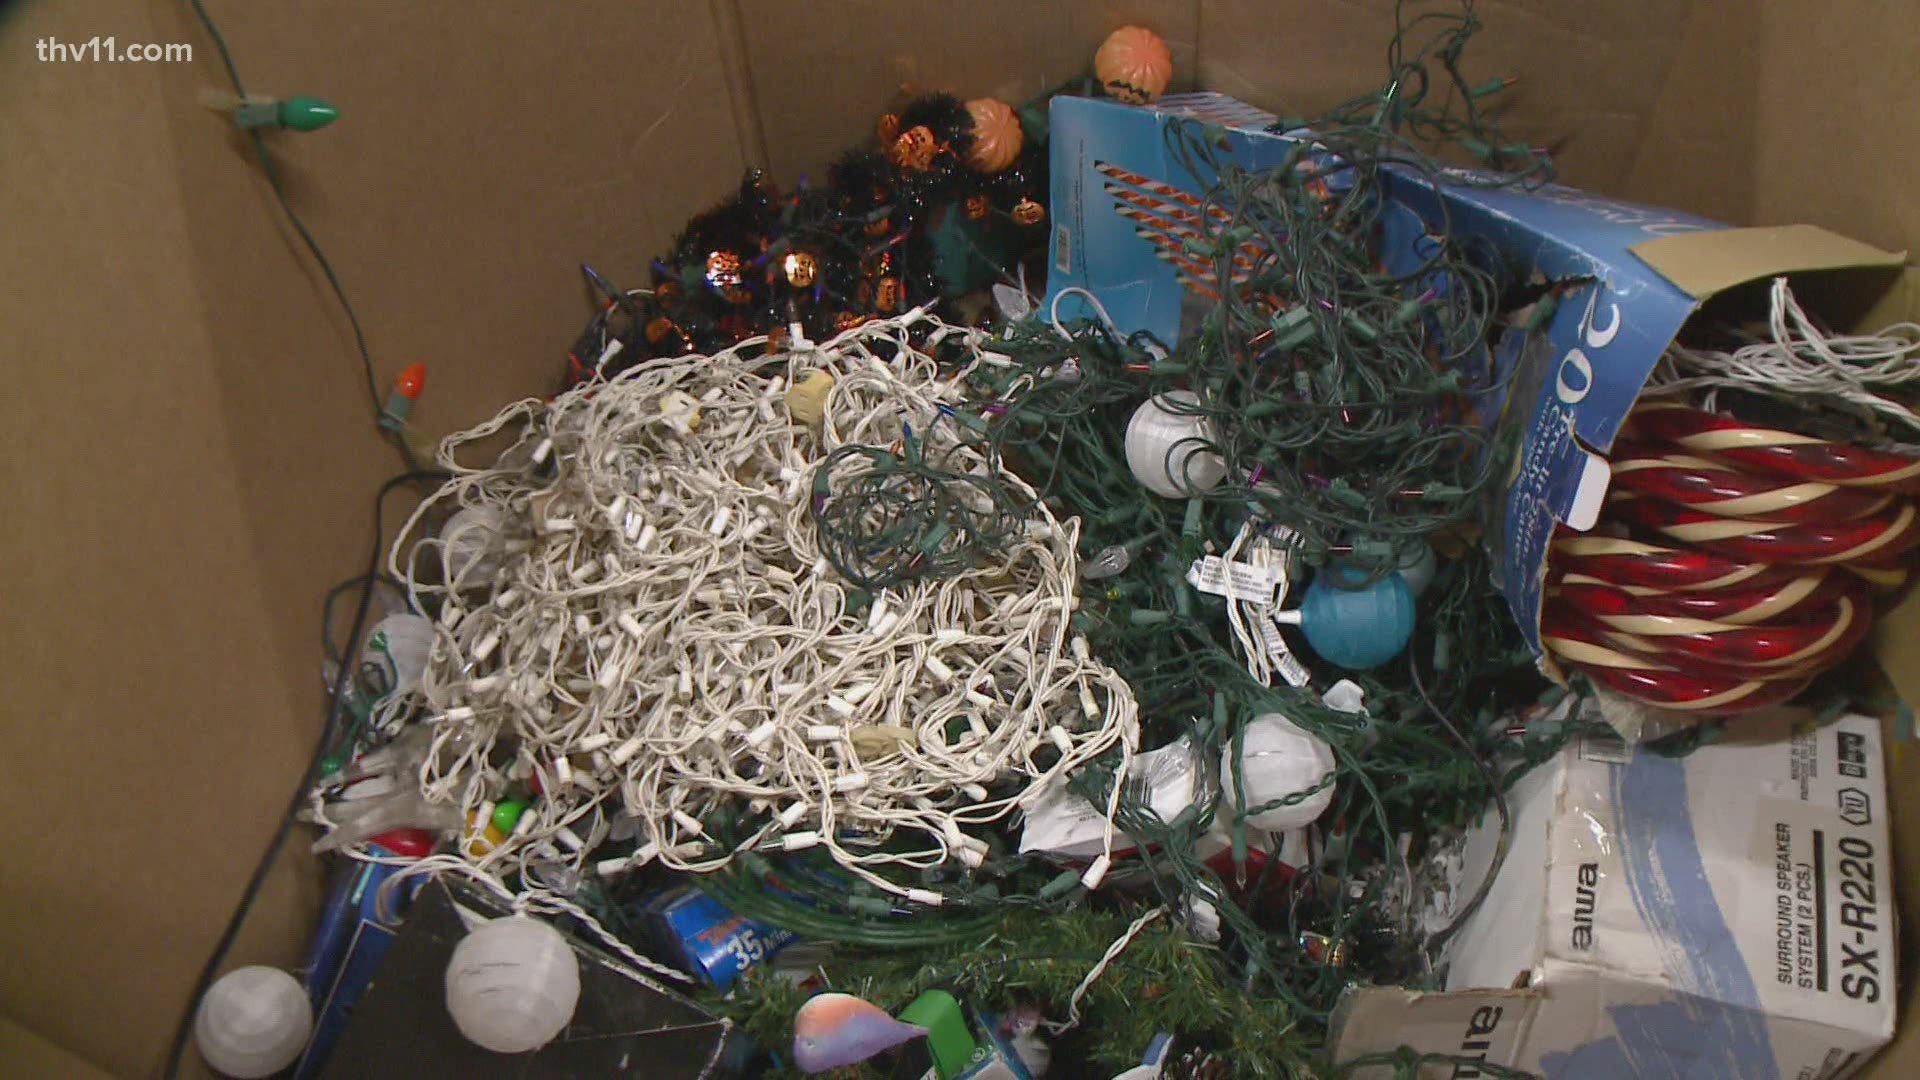 Instead of throwing away your holiday lights that don't work, Goodwill wants to take them off your hands.